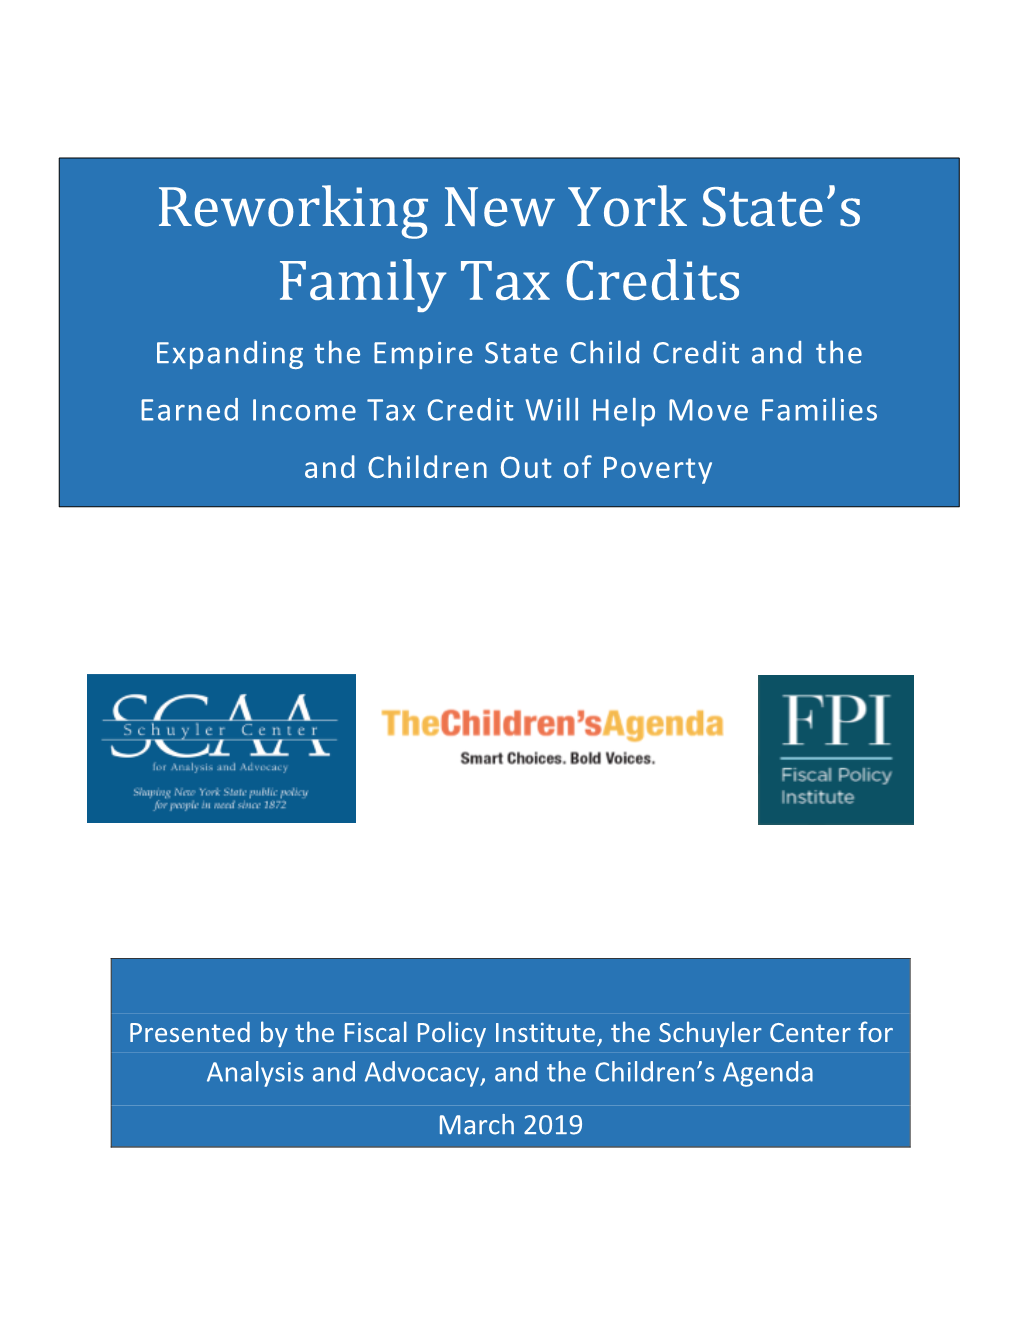 Reworking New York State's Family Tax Credits